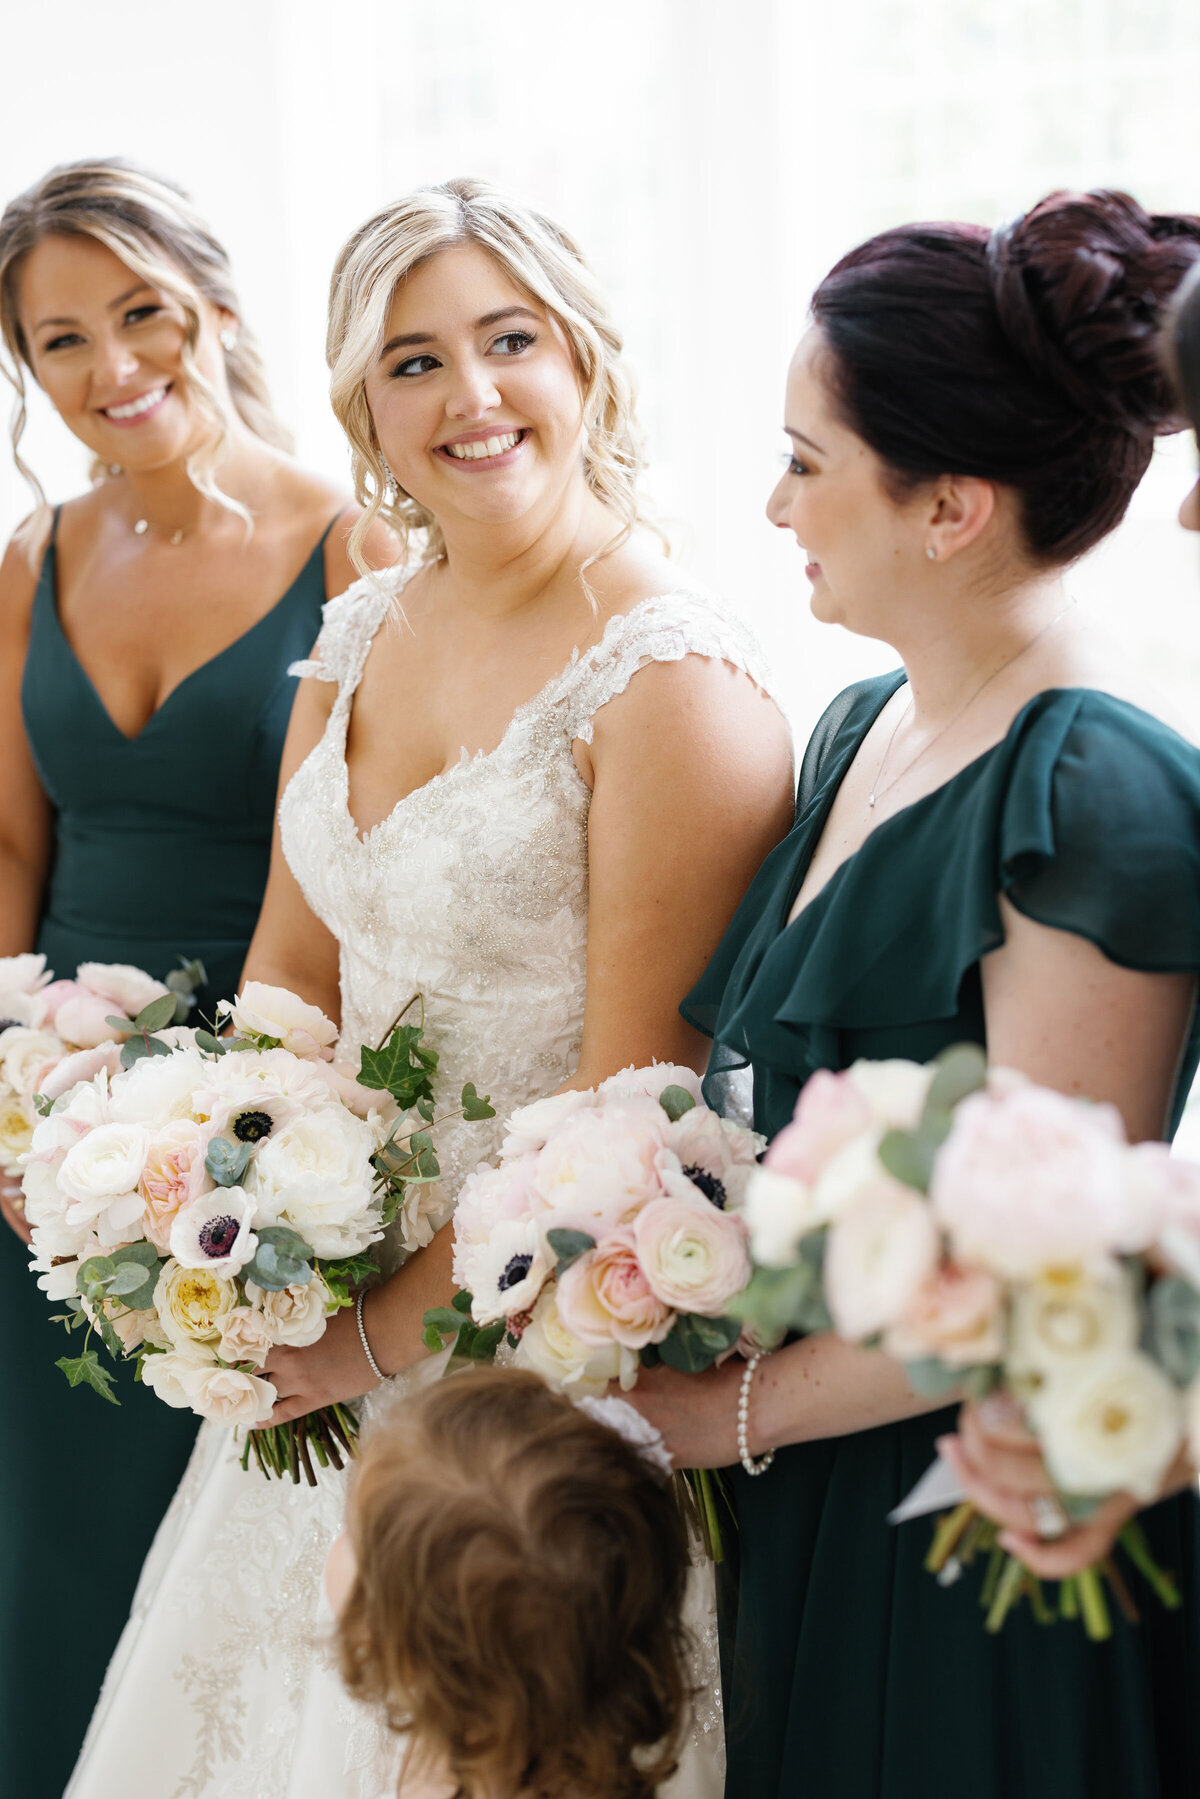 emeralnd-bridesmaids-dresses-with-blush-and-white-bouqets-enza-events